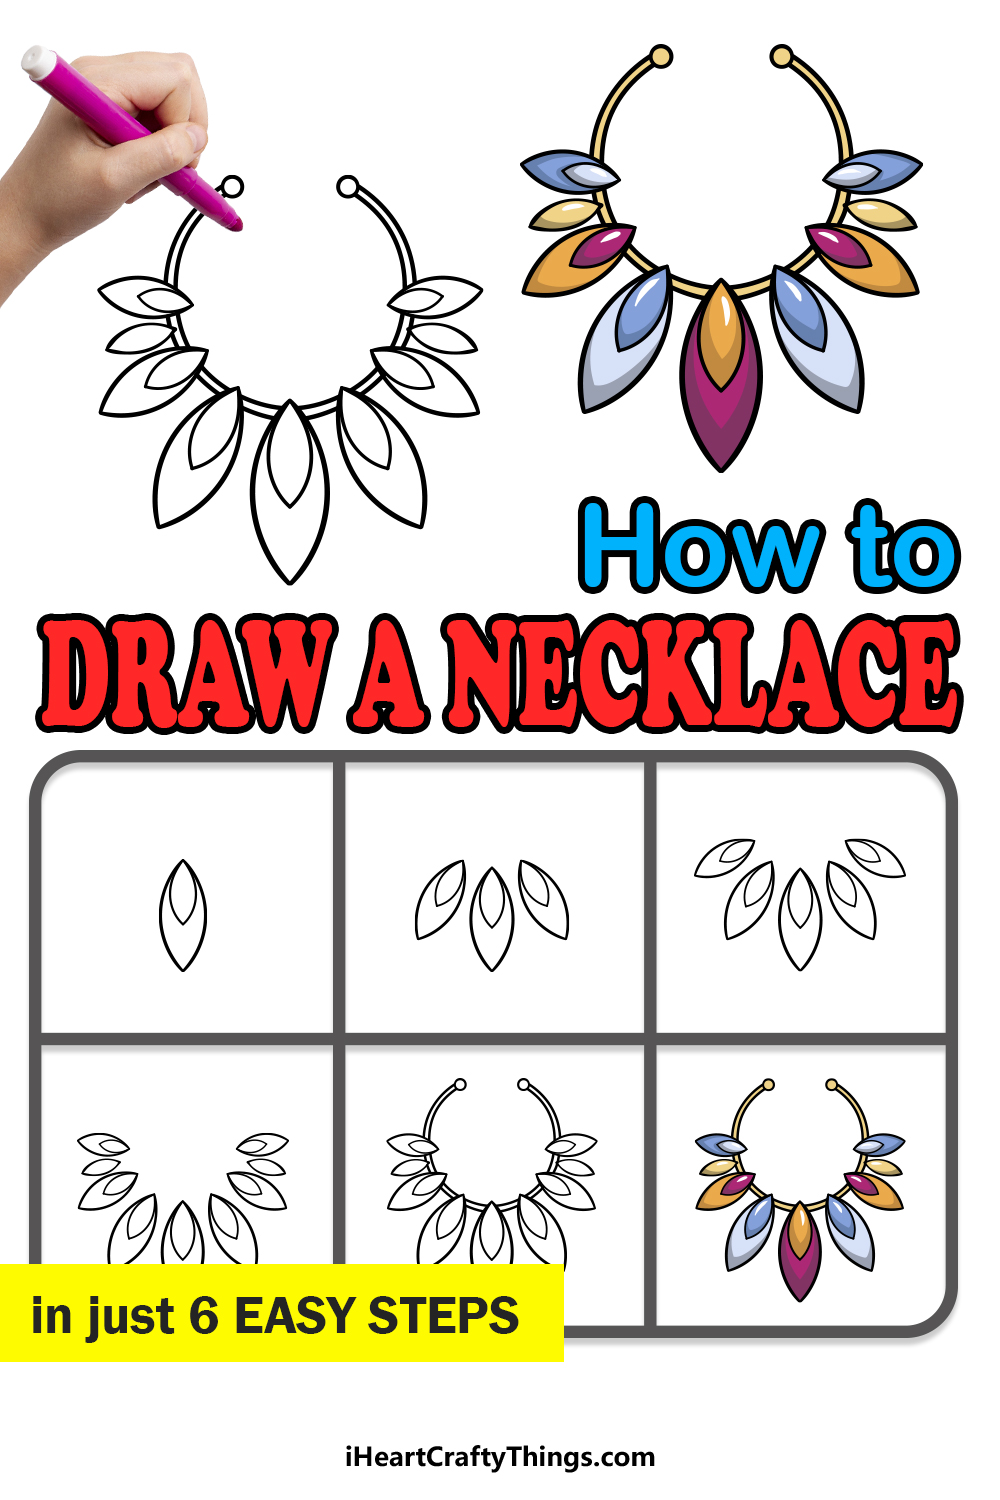 how to draw a Necklace in 6 easy steps